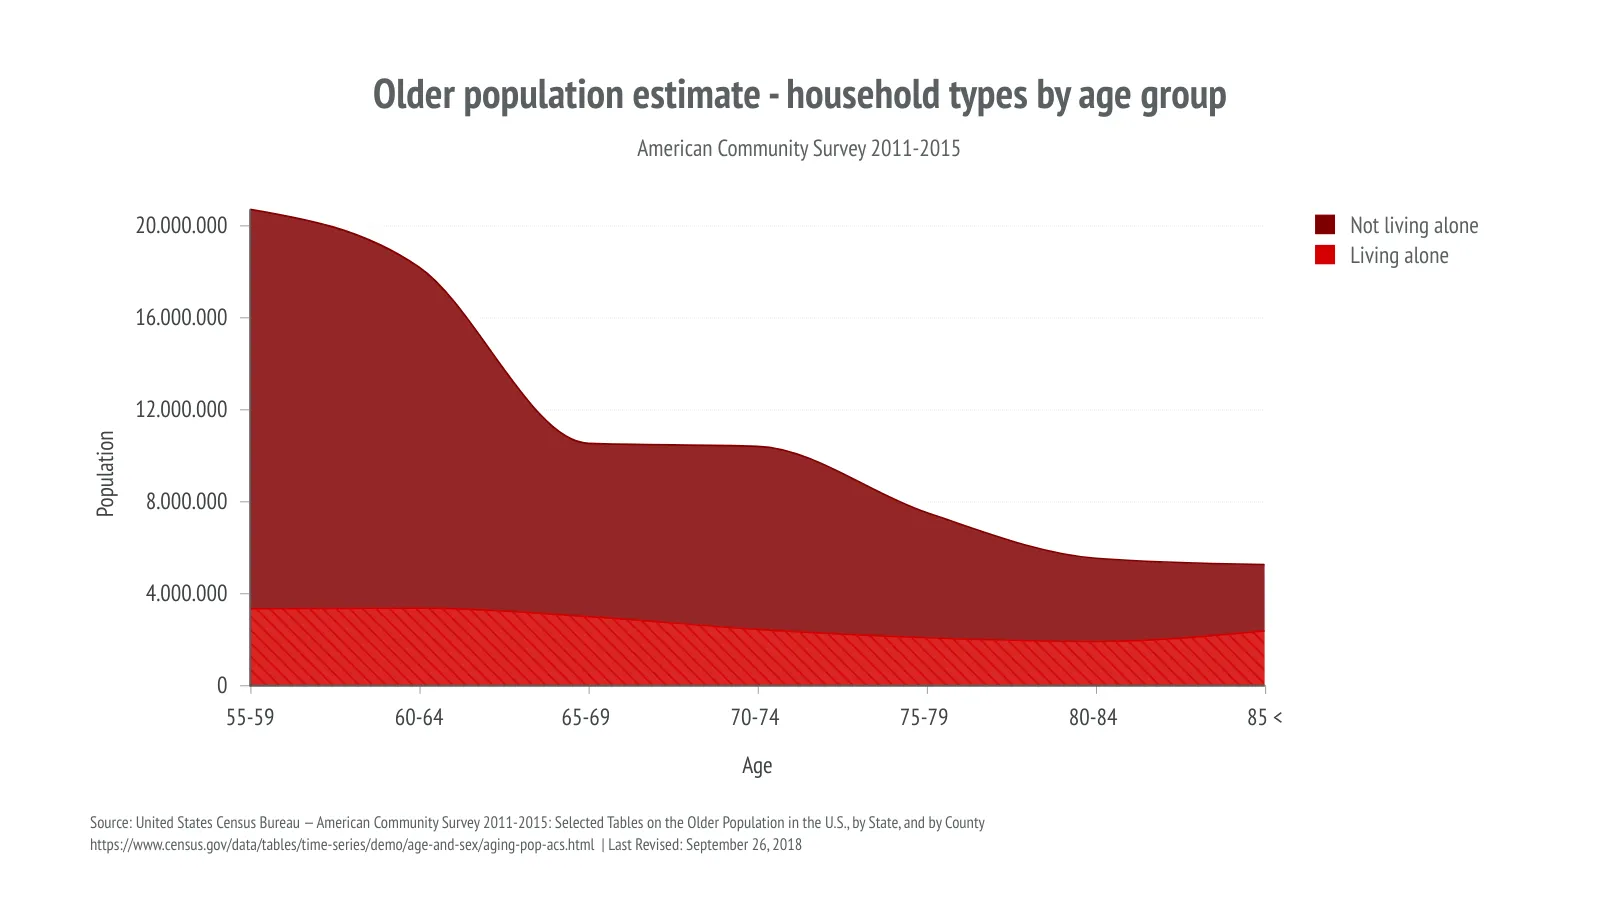 Stacked Area Chart example: Older population estimate - household types by age group